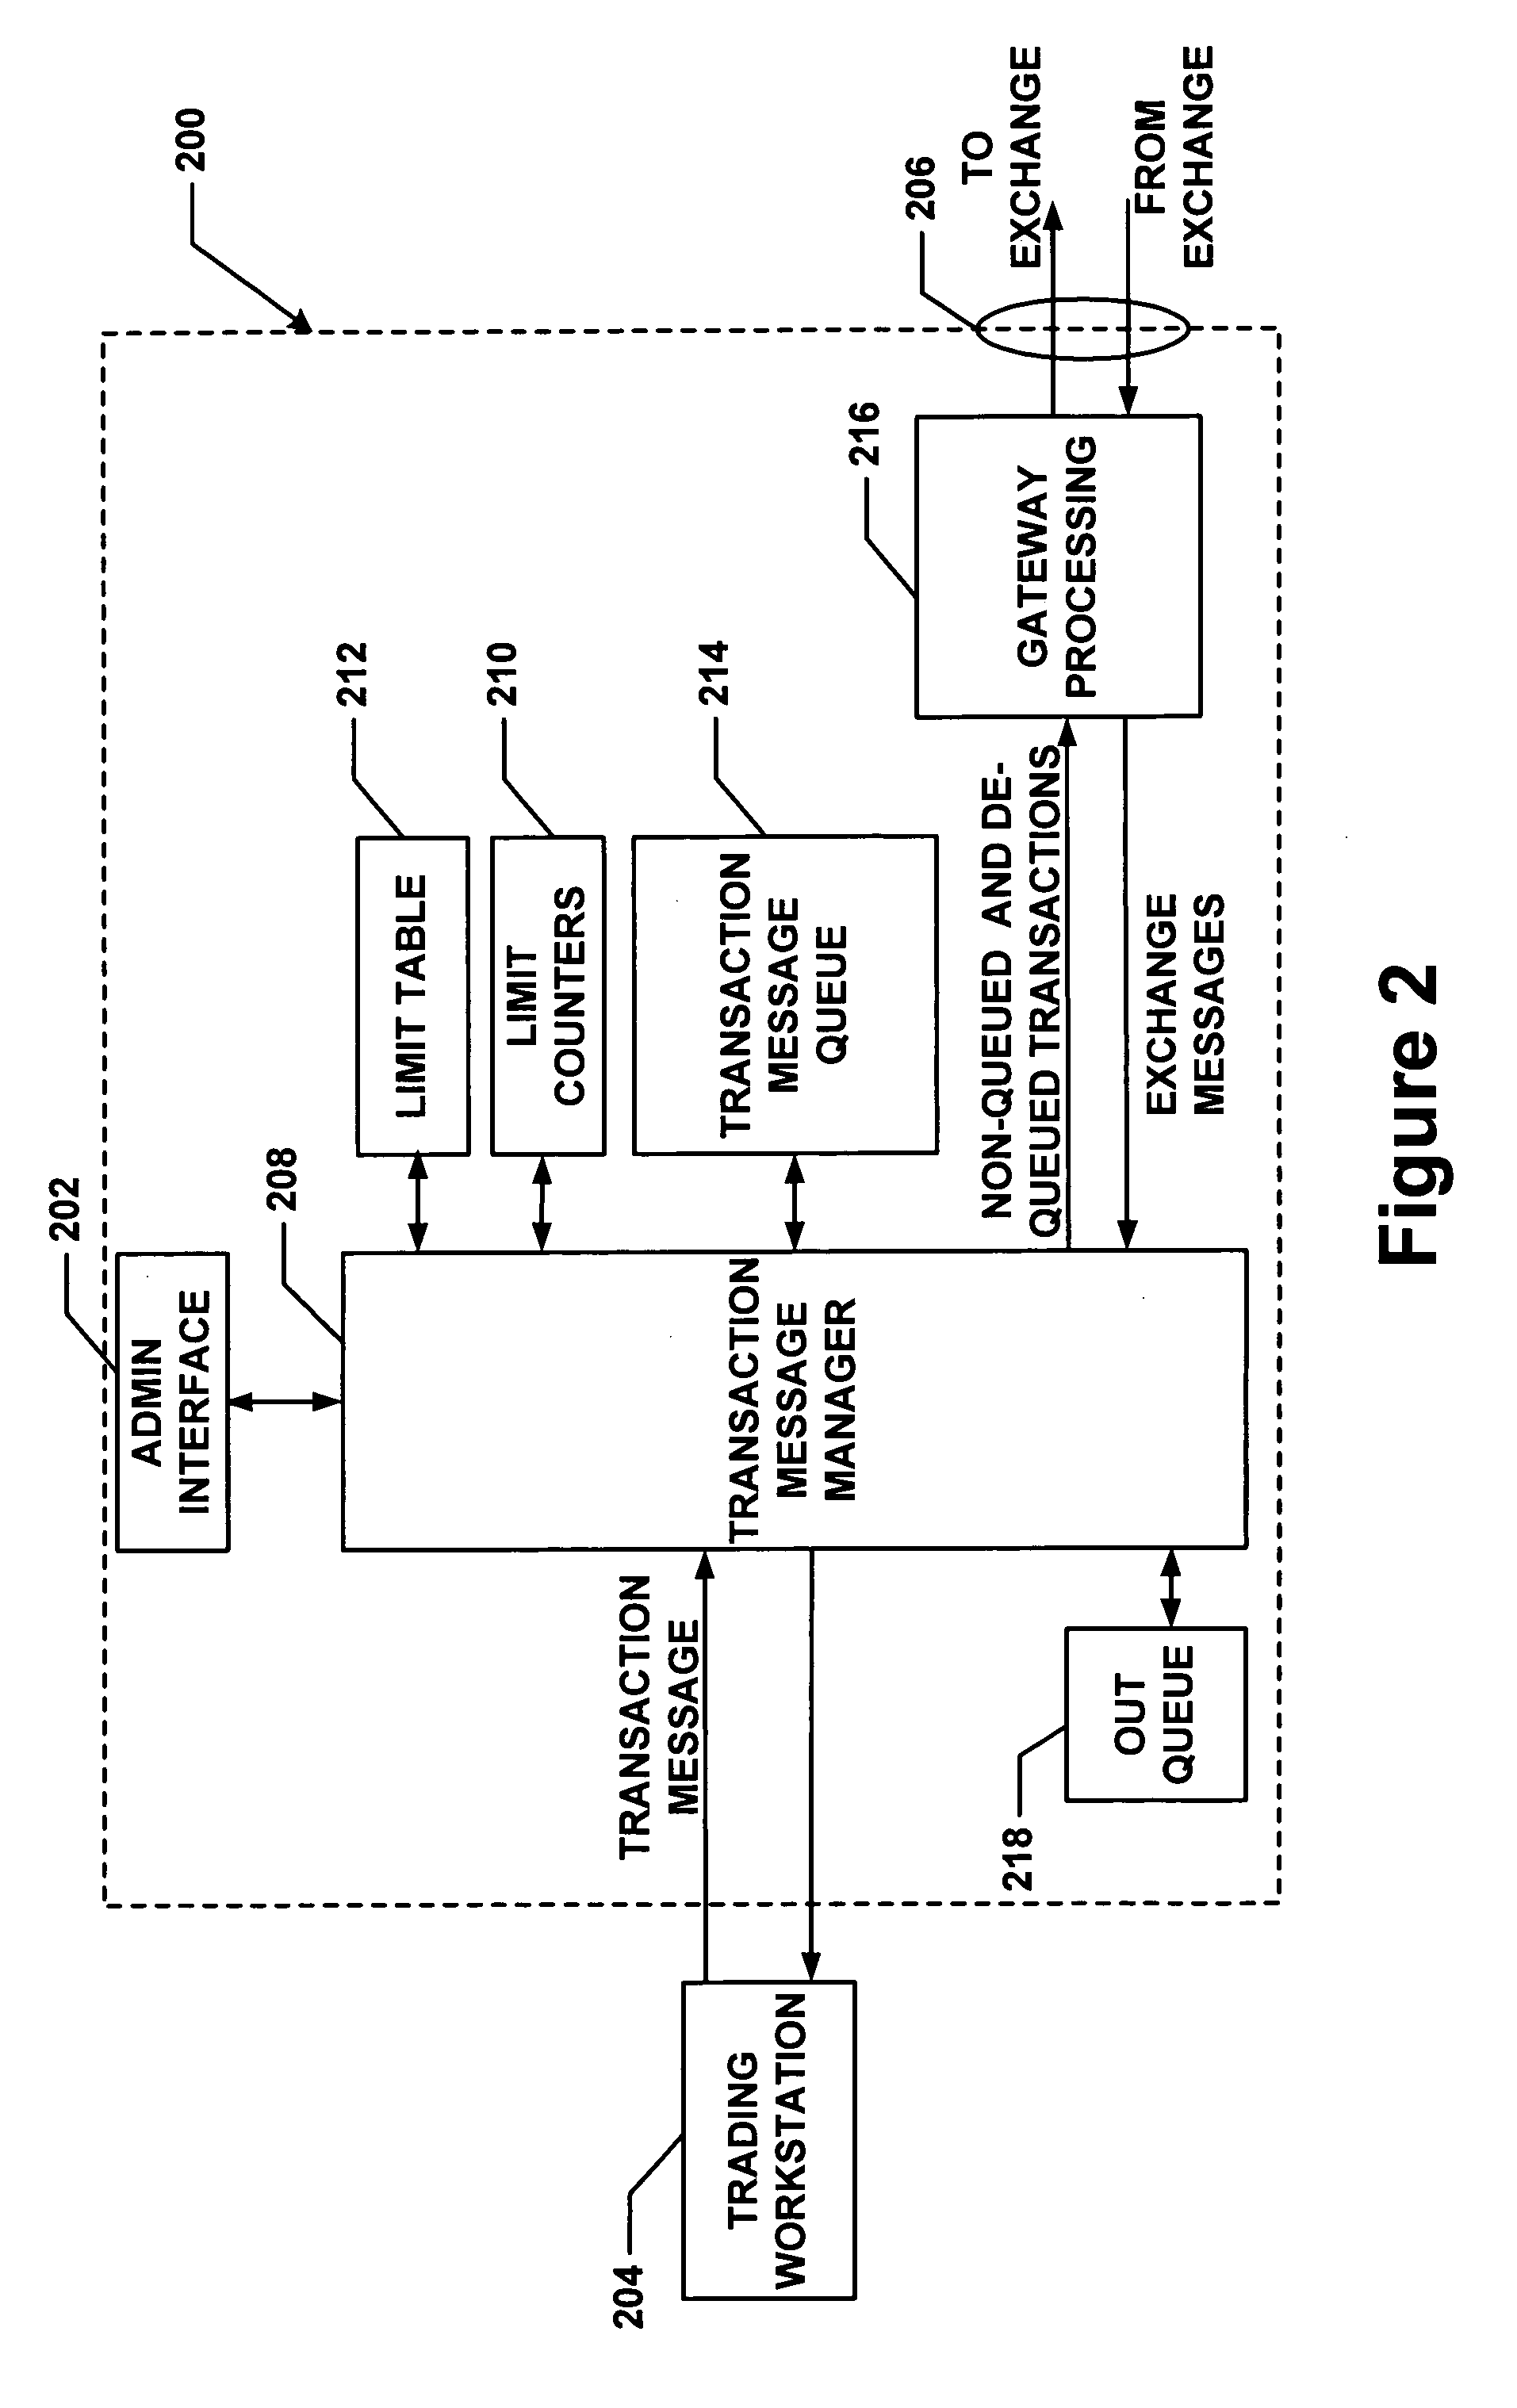 Method and apparatus for message flow and transaction queue management